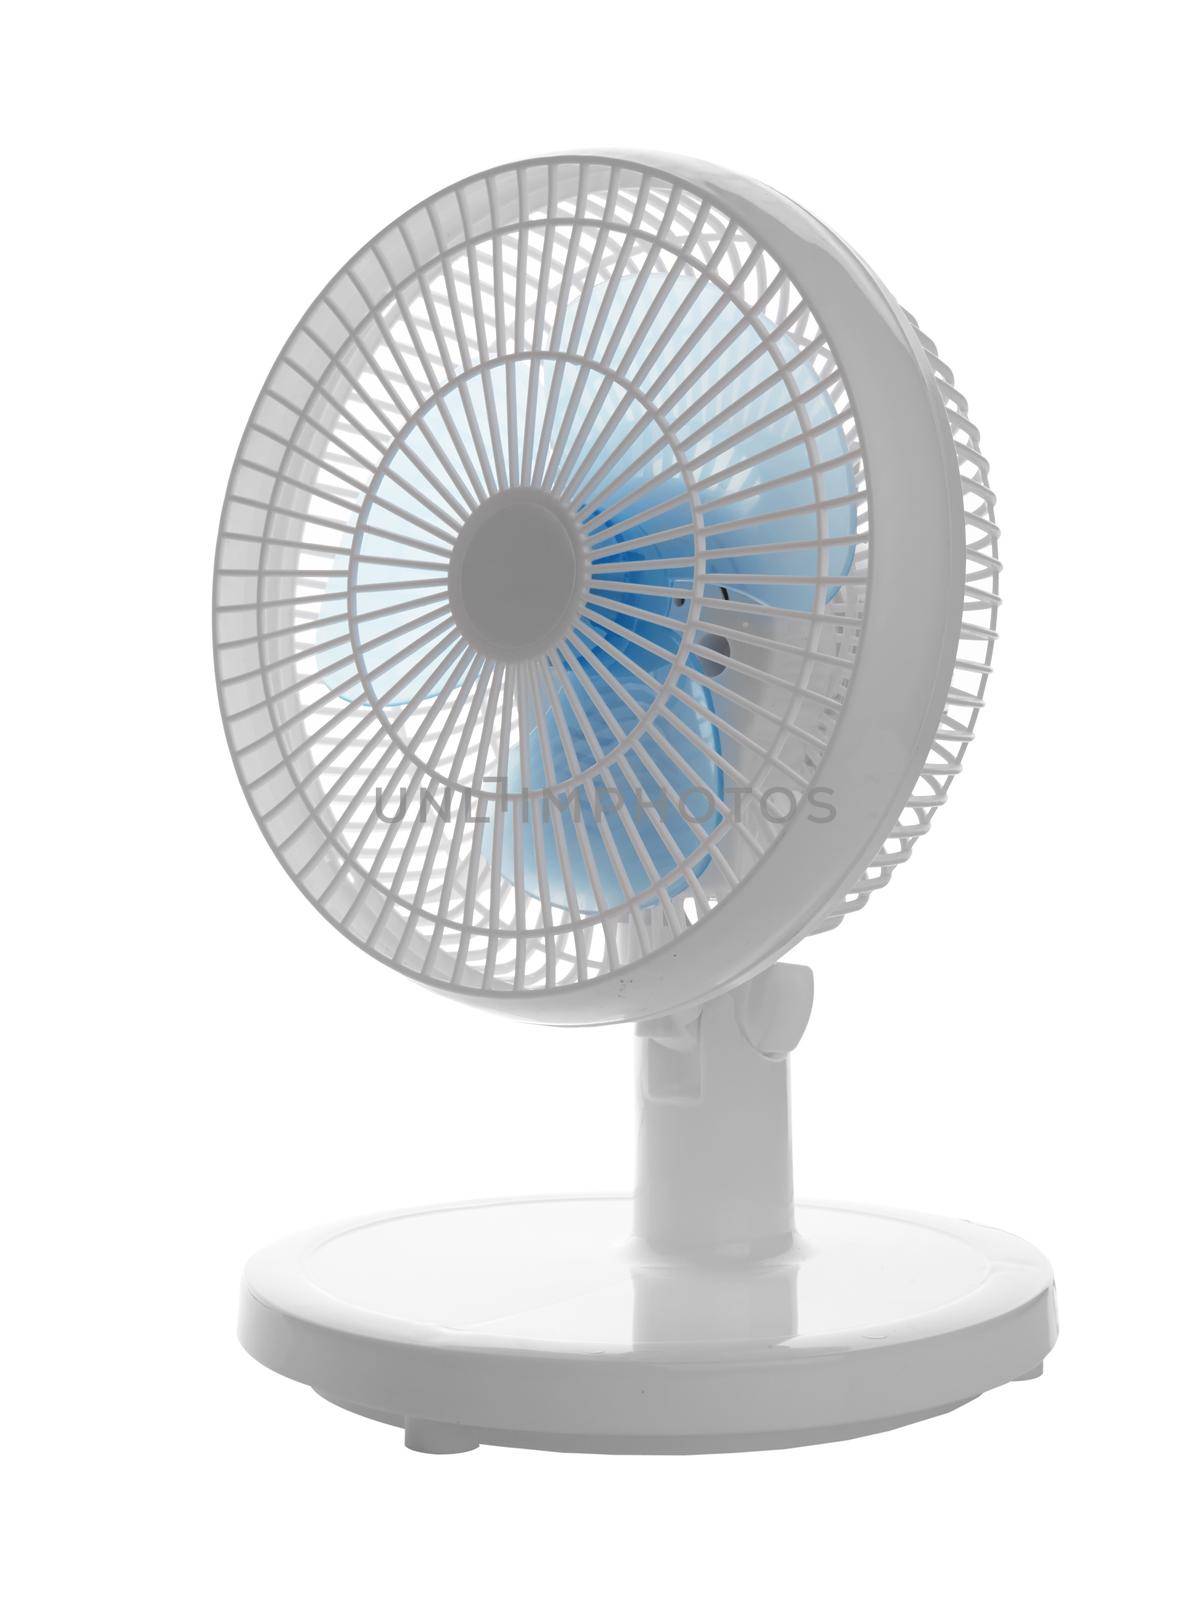 White electric fan isolated on a white background